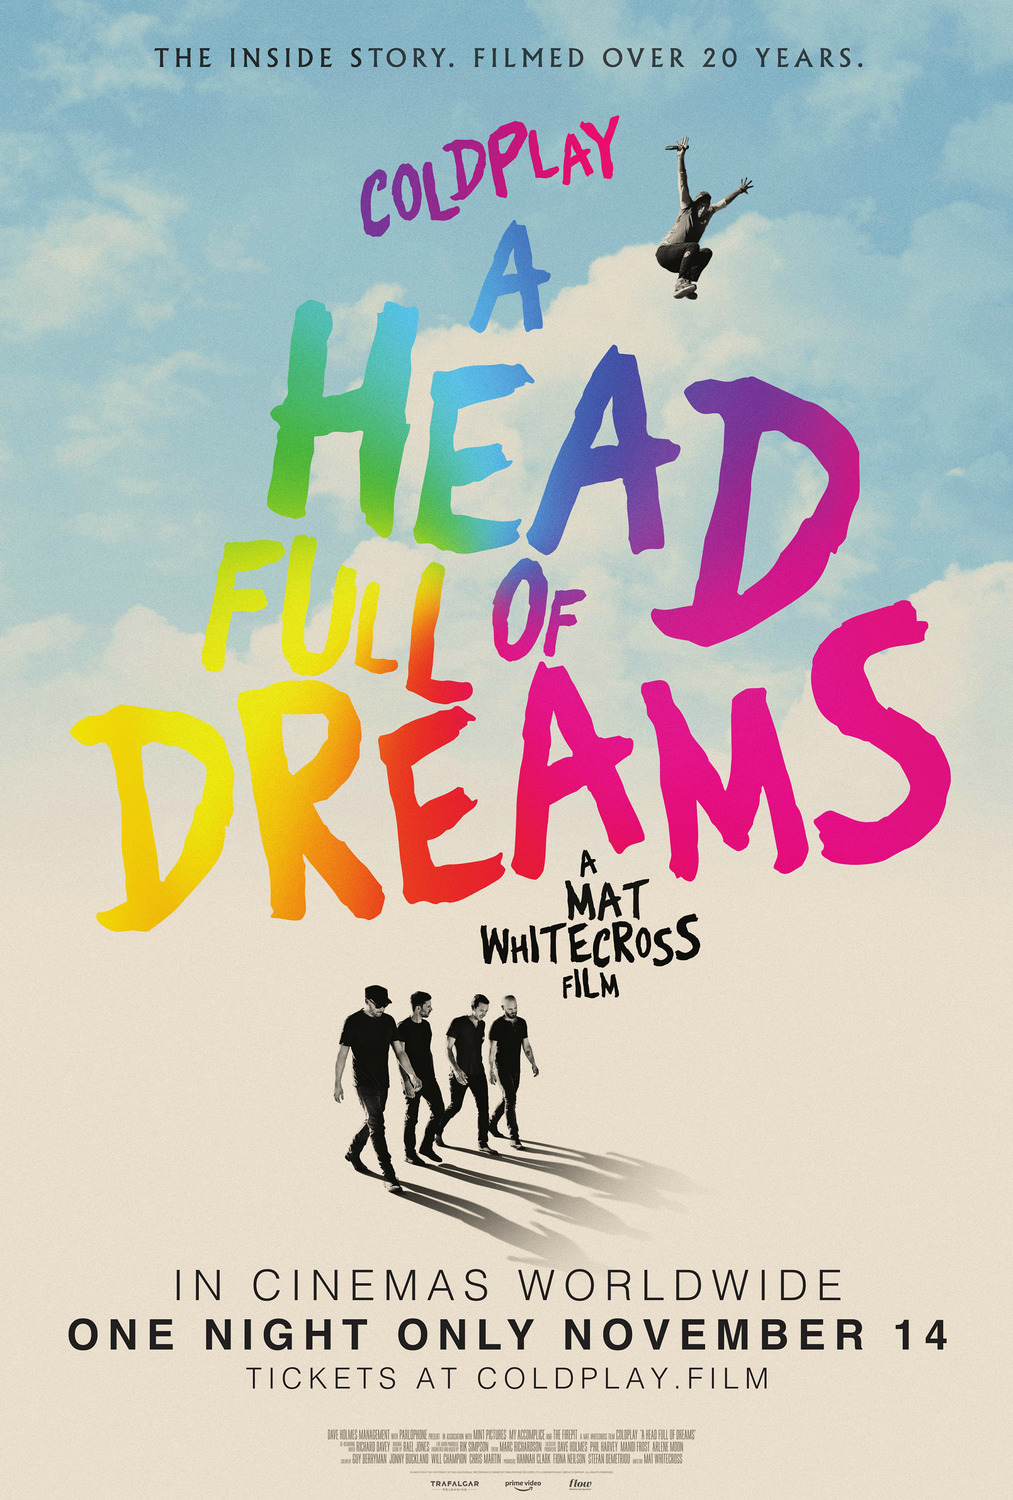 Extra Large Movie Poster Image for Coldplay: A Head Full of Dreams 